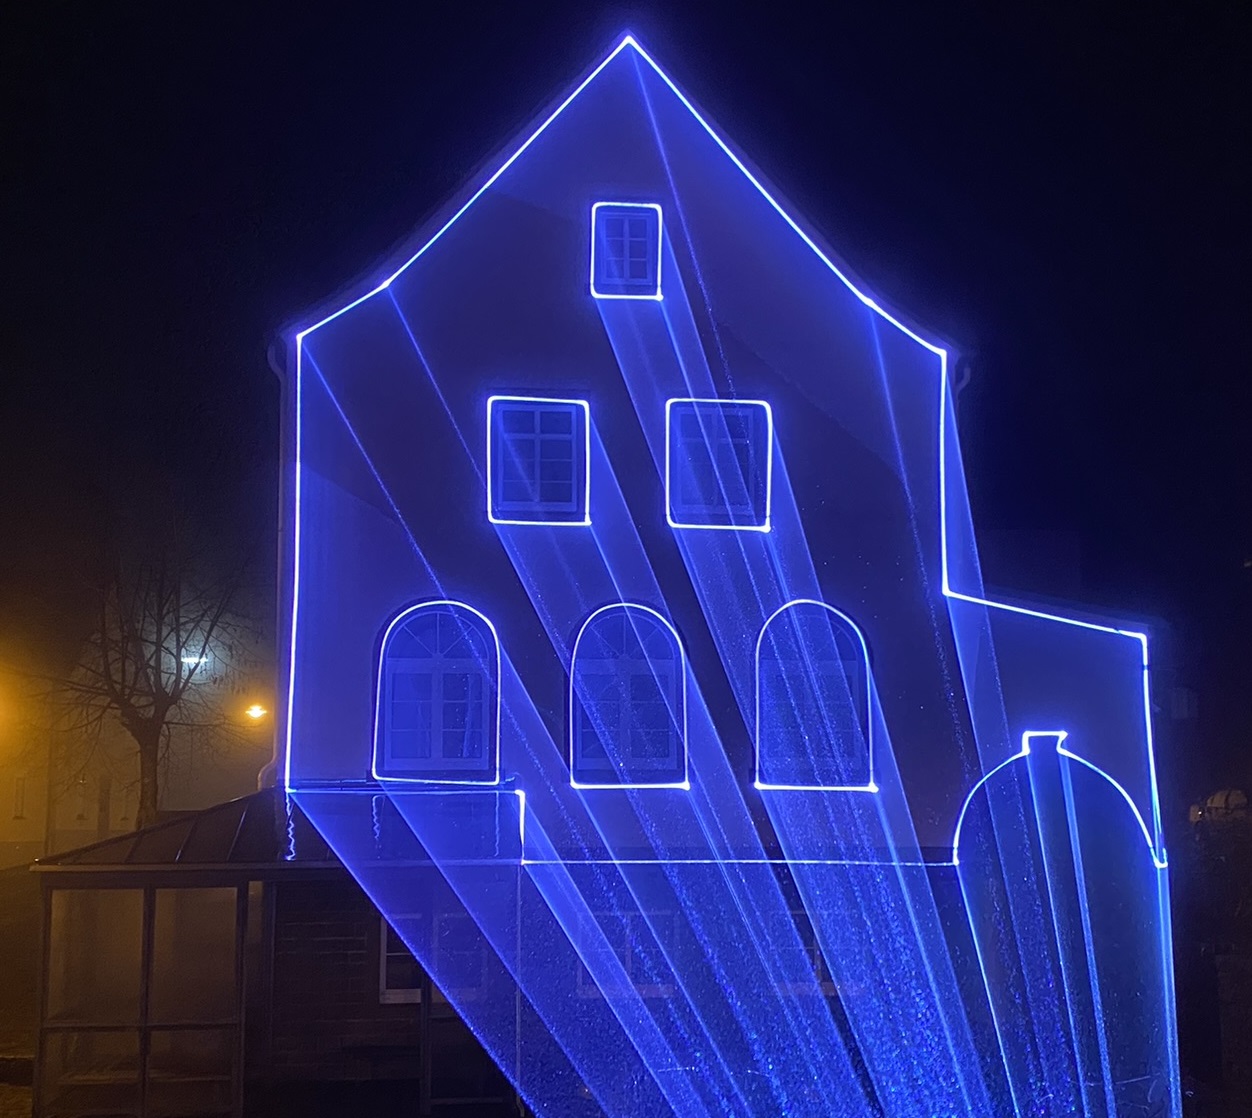 Lasershows at the highest level